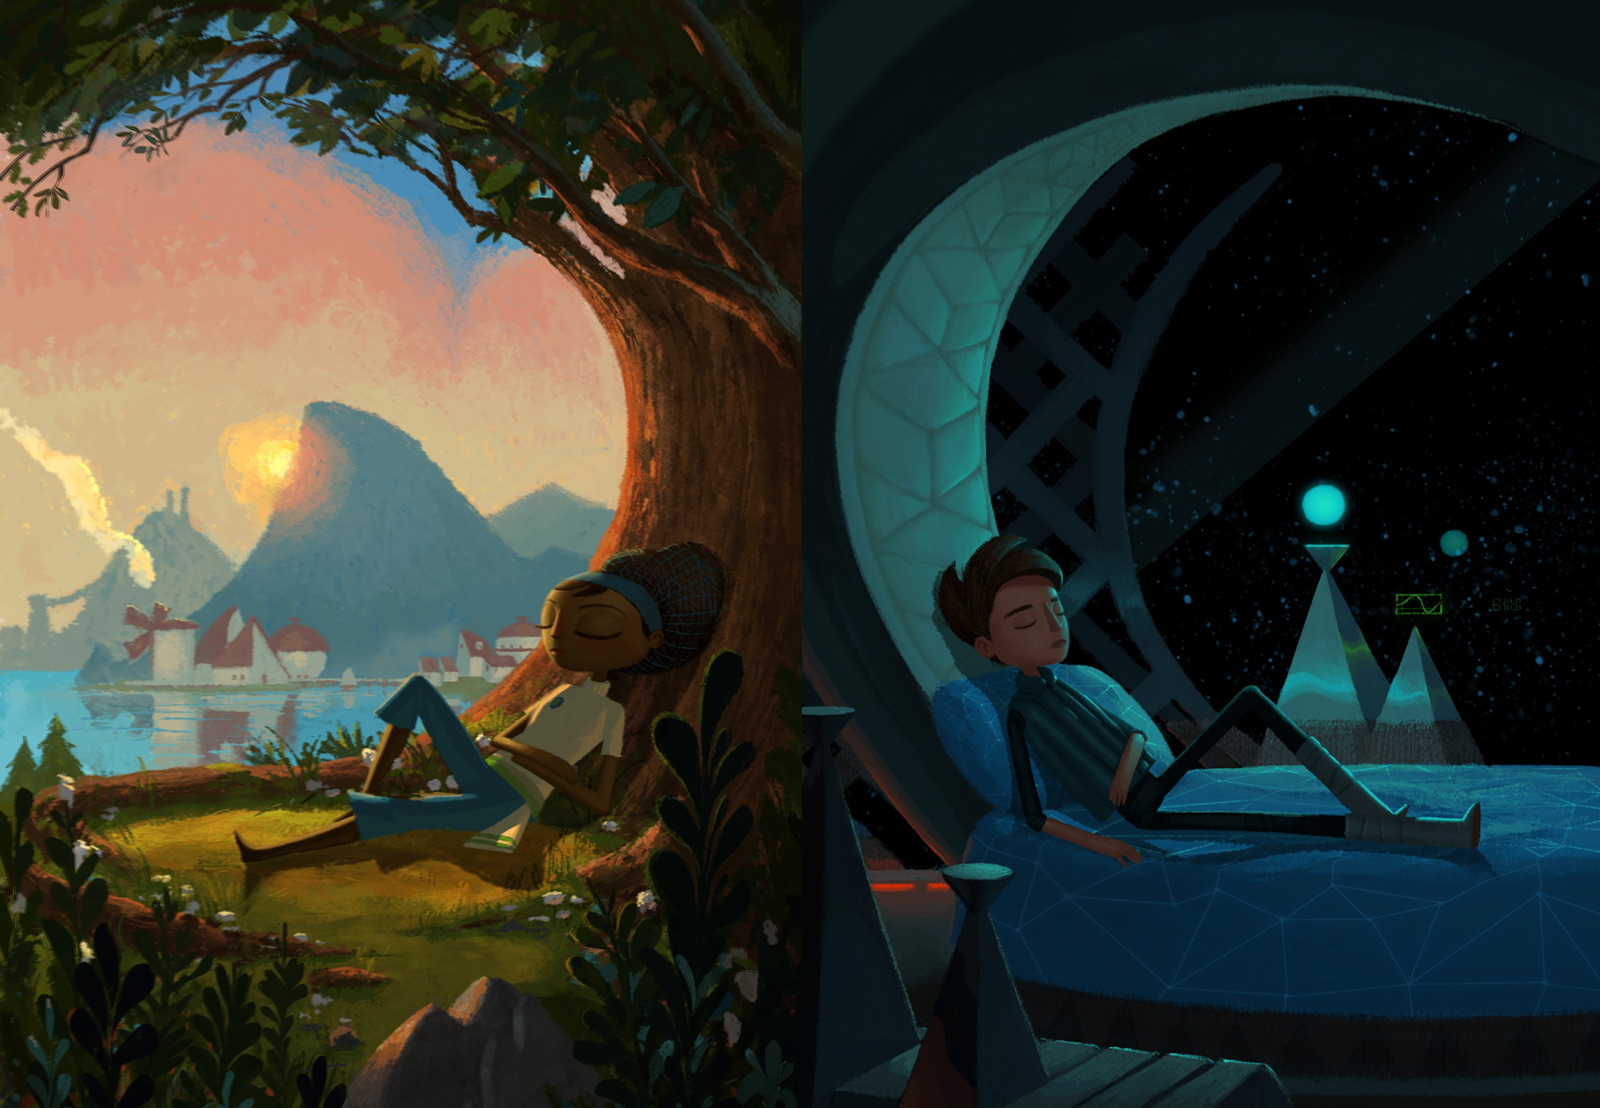 Geek insider, geekinsider, geekinsider. Com,, broken age: risk gone right, gaming